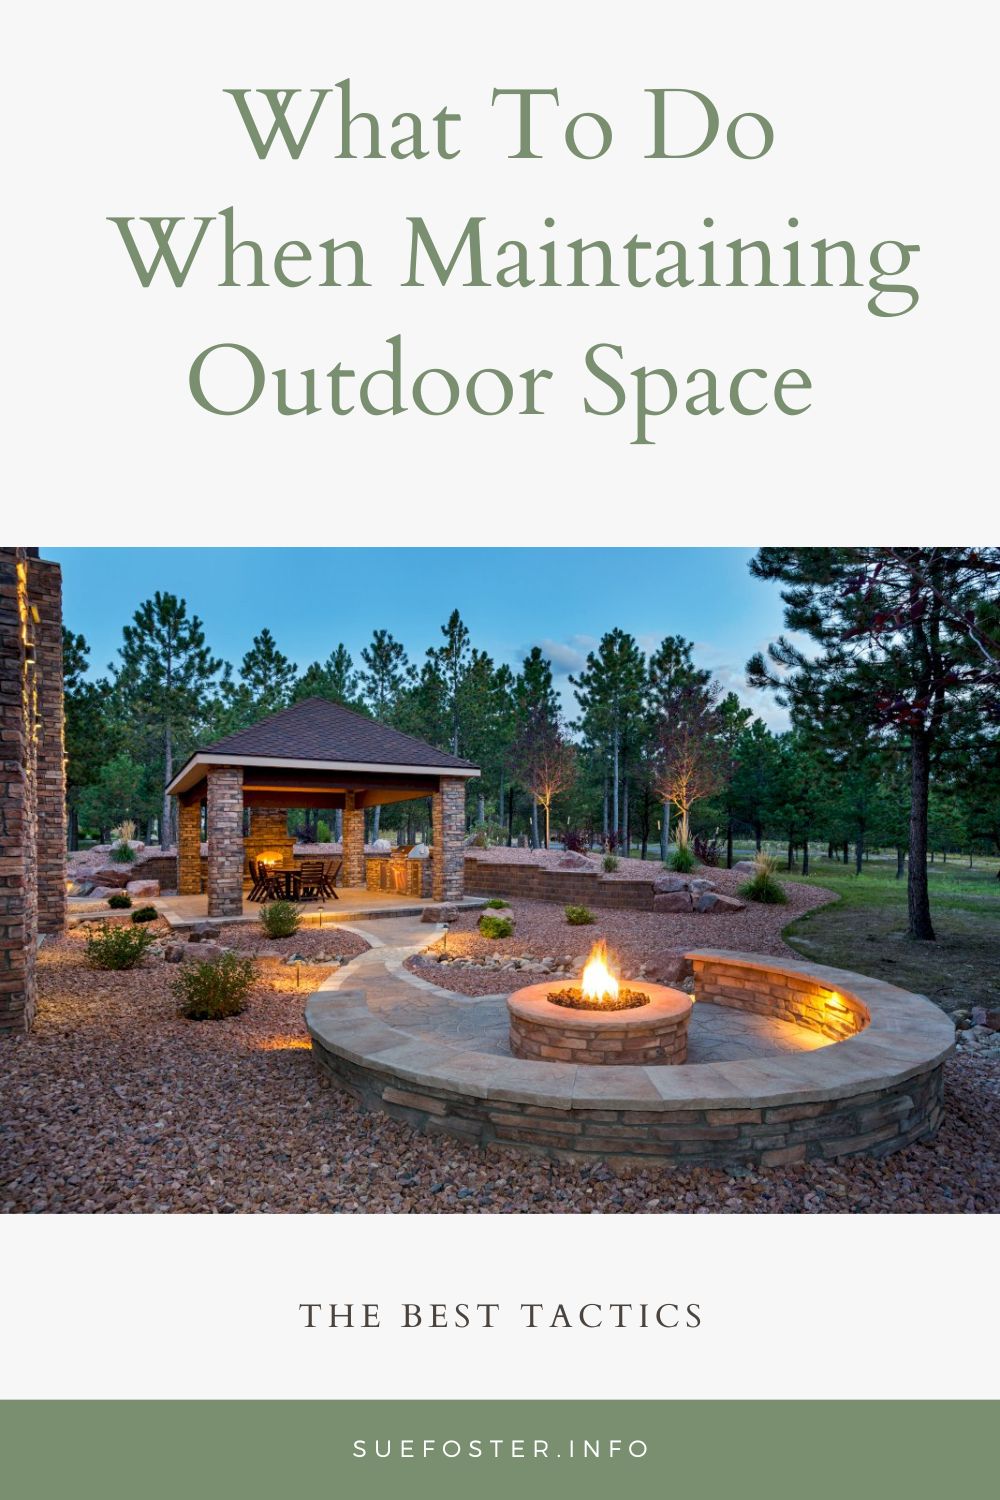 A well-designed outdoor space has plenty of benefits for an ideal home. Here are a few tips to ensure you maintain overall outdoor aesthetics.